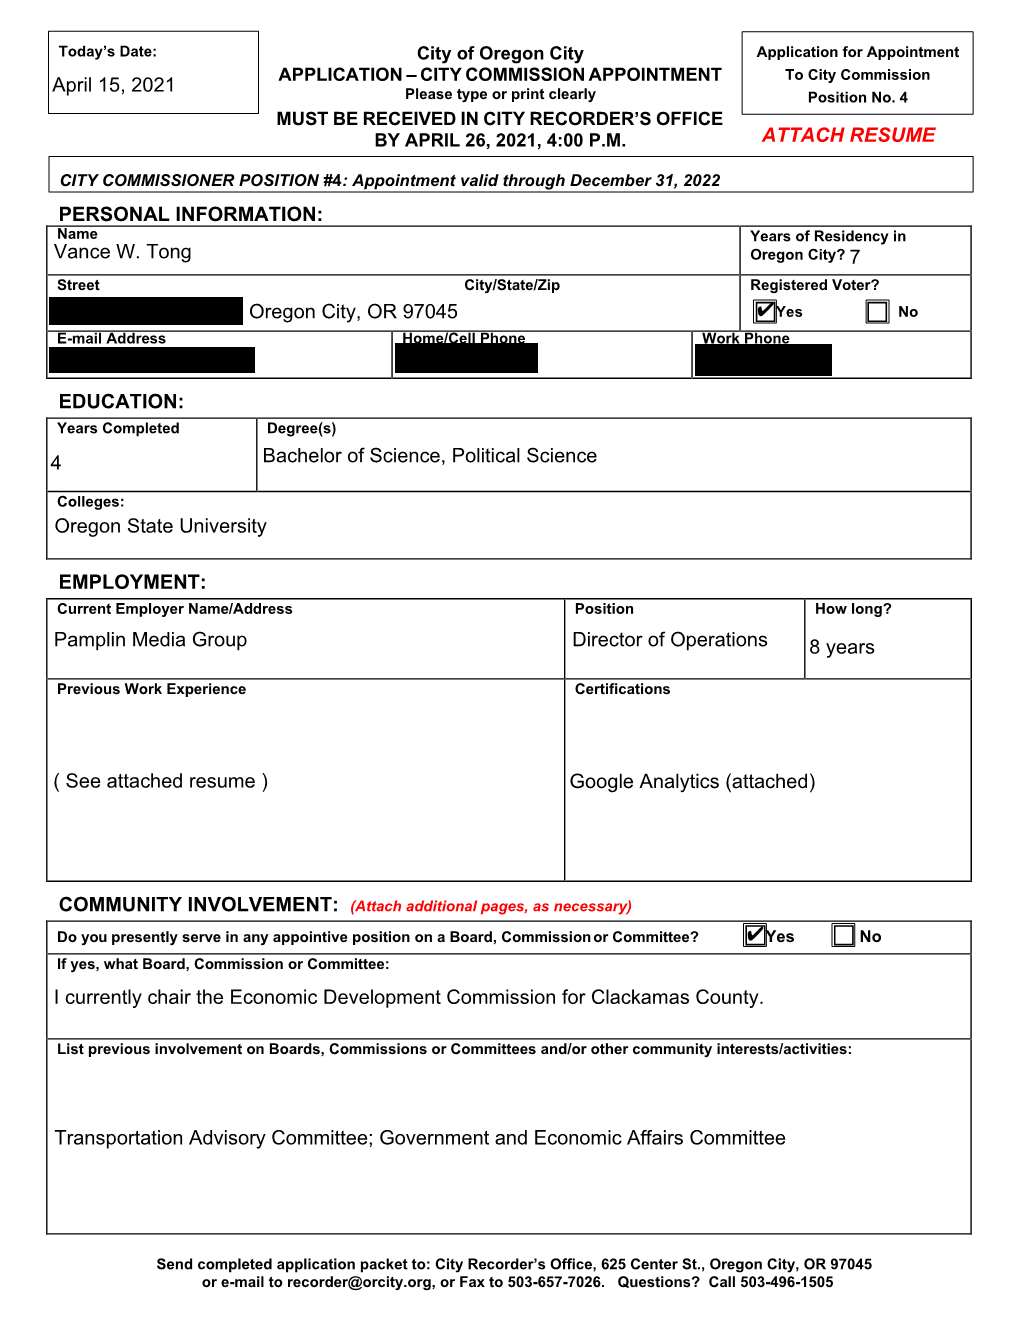 ATTACH RESUME PERSONAL INFORMATION: Vance W. Tong